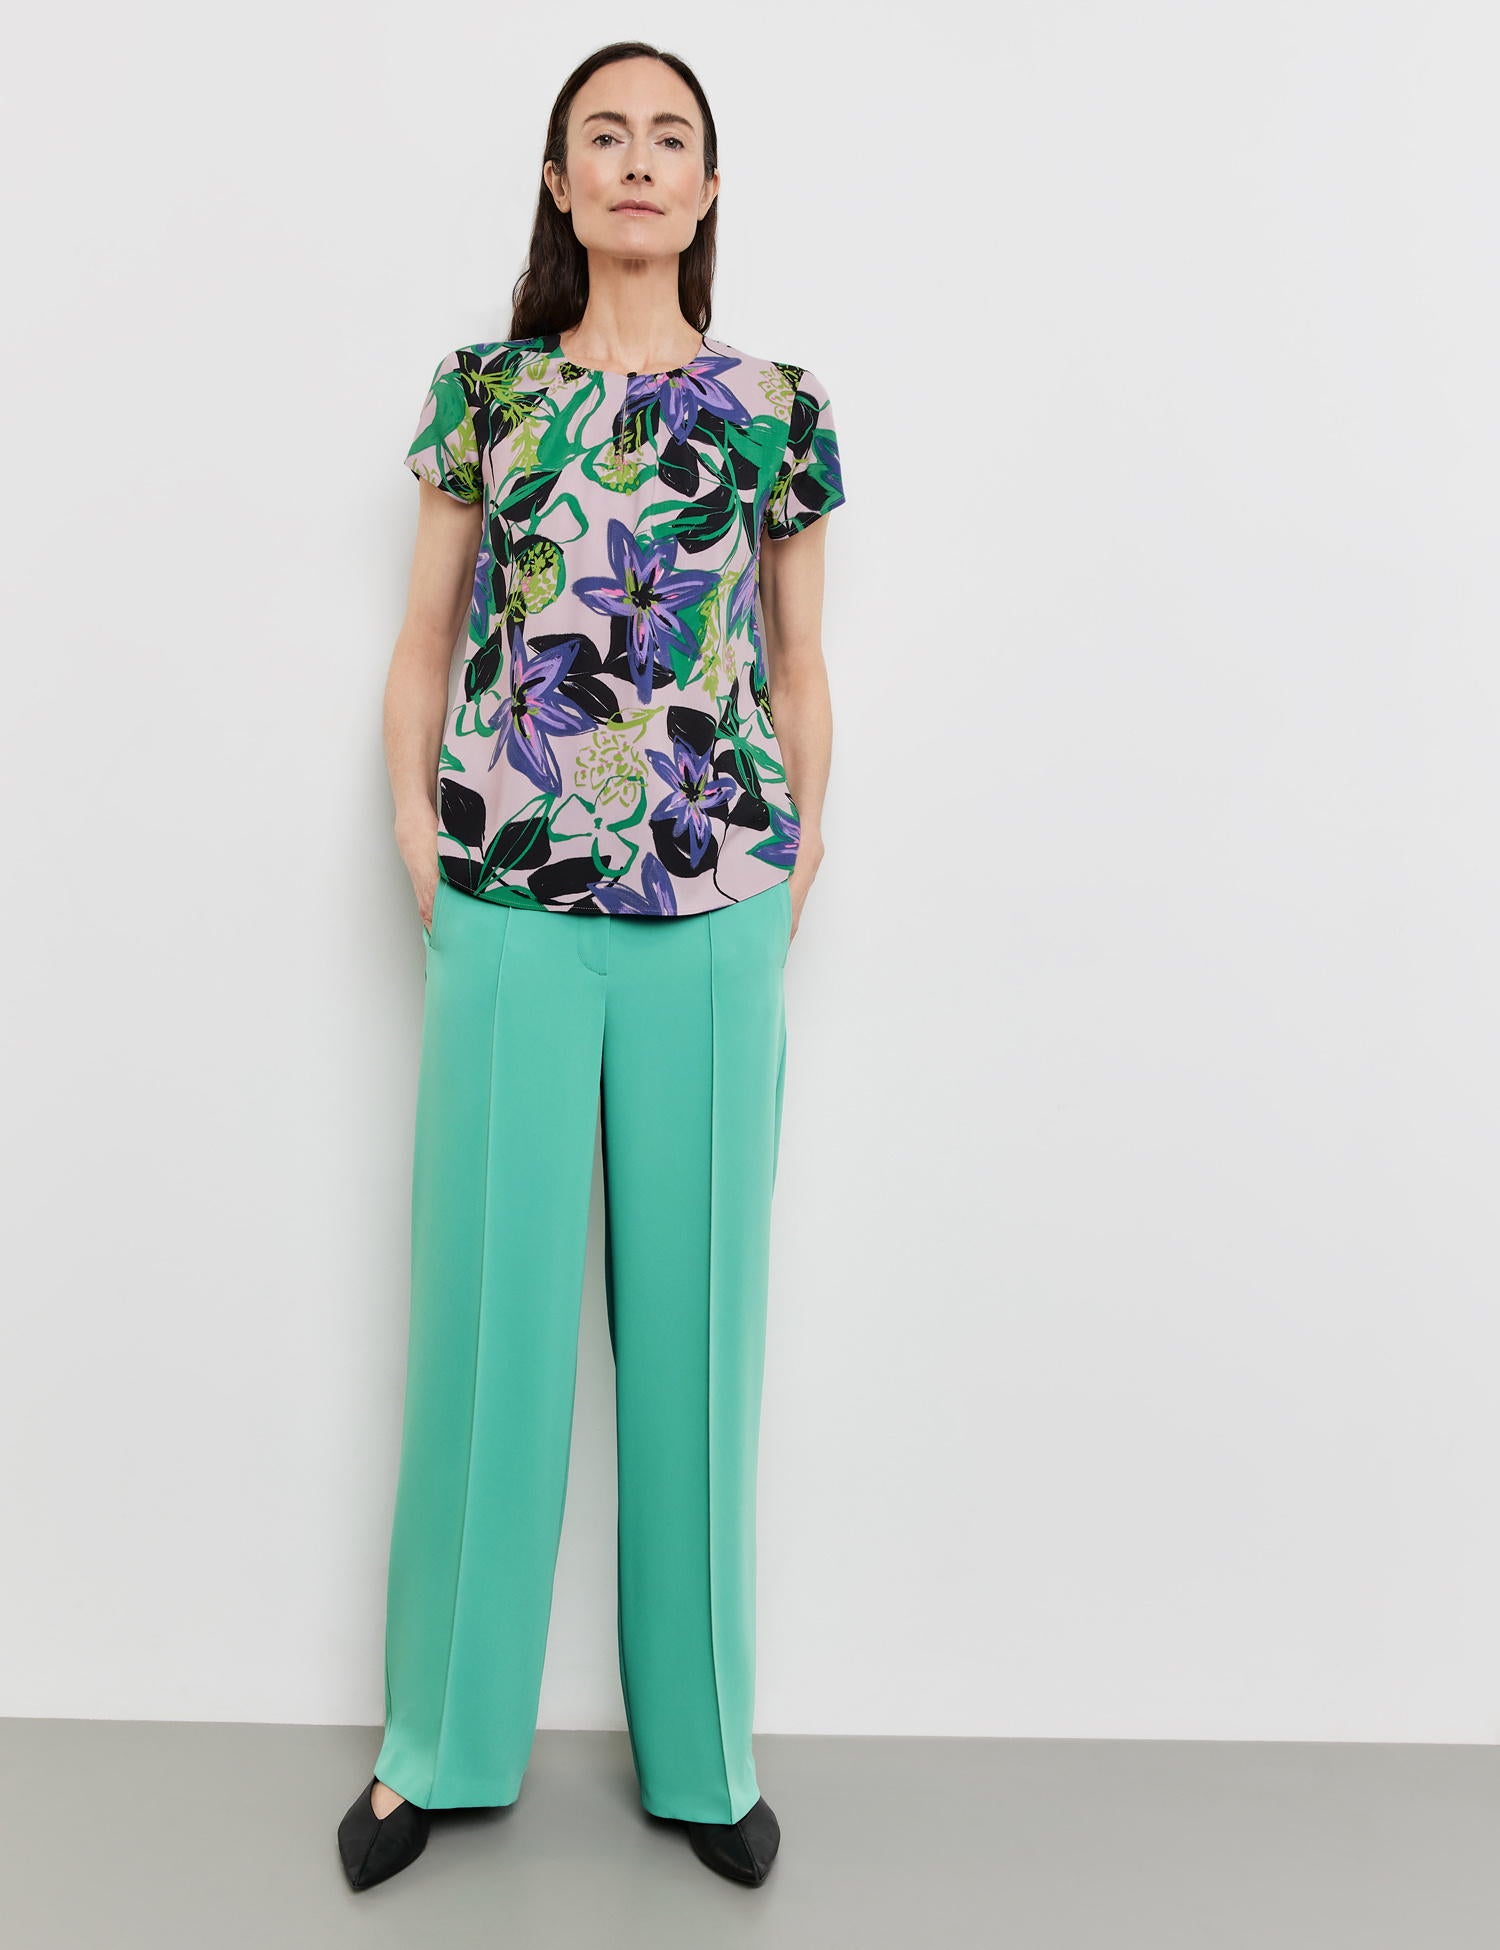 Blouse Top With A Floral Pattern_360019-31408_3058_05